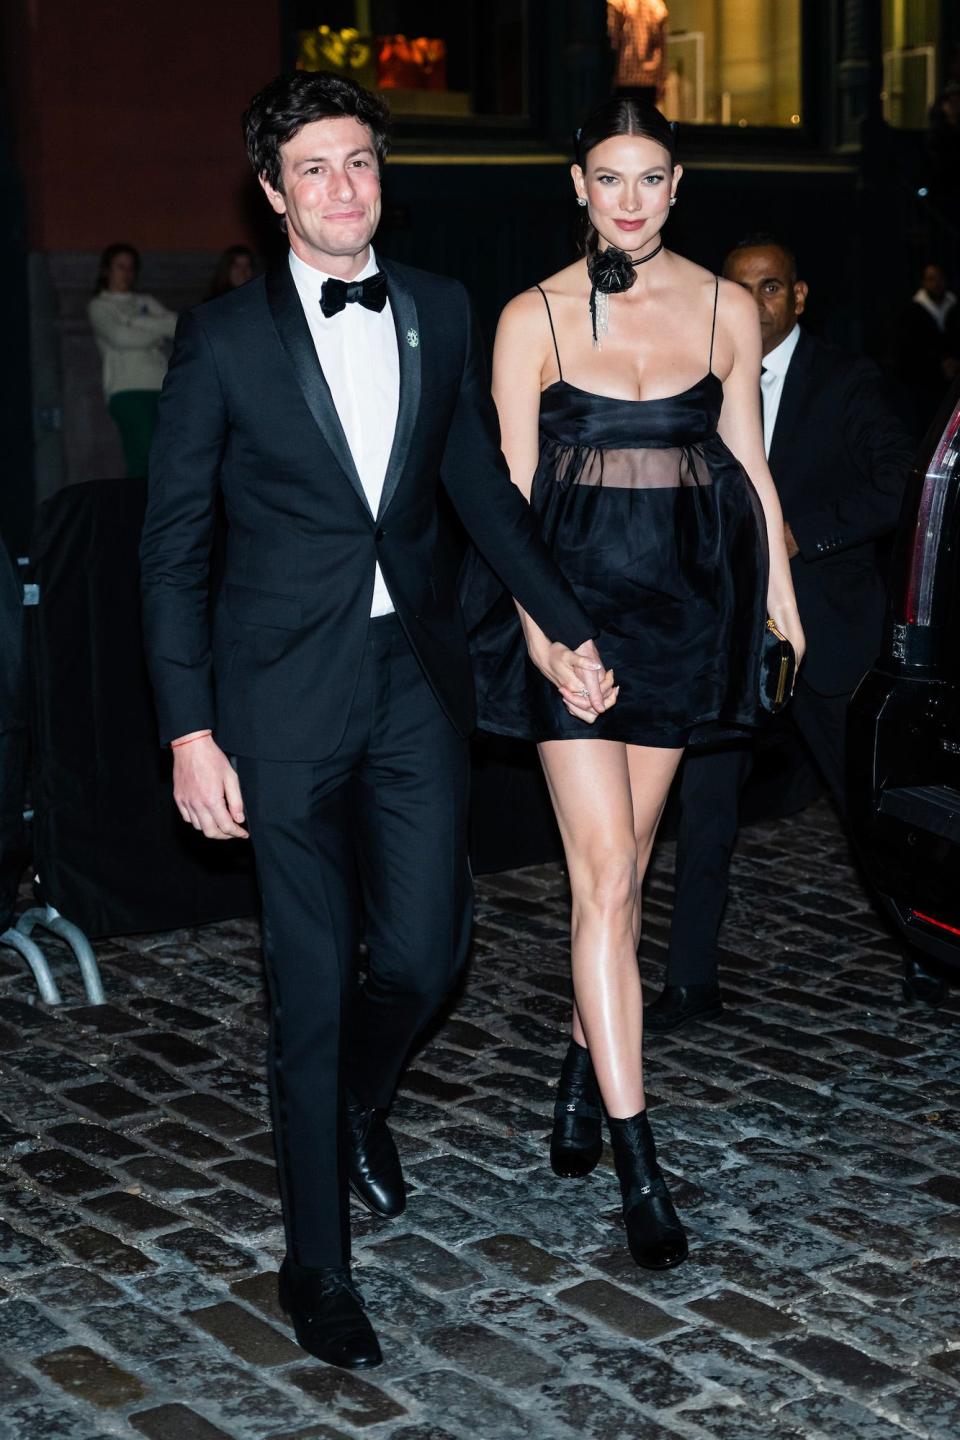 Joshua Kushner and Karlie Kloss attend a 2023 Met Gala after party.